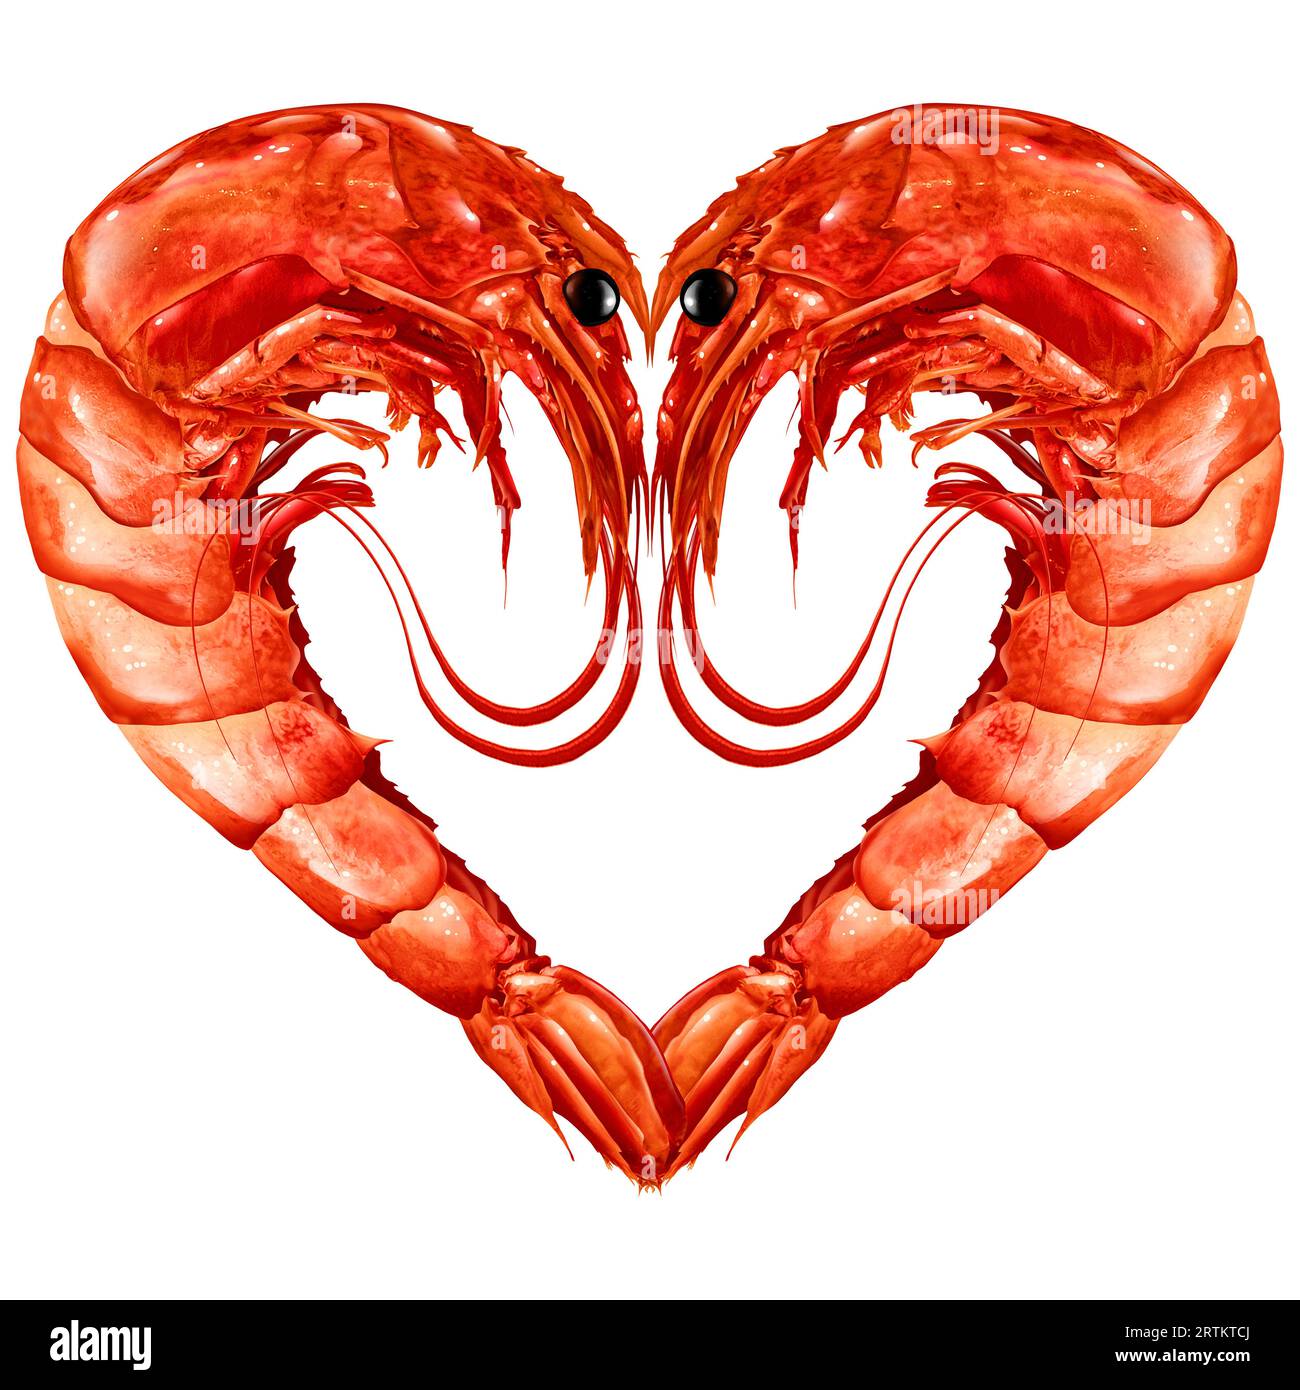 Shrimp love heart symbol isolated on a white background representing red prawn crustacean and prawn seafood cooking as shrimps or fisheries Stock Photo